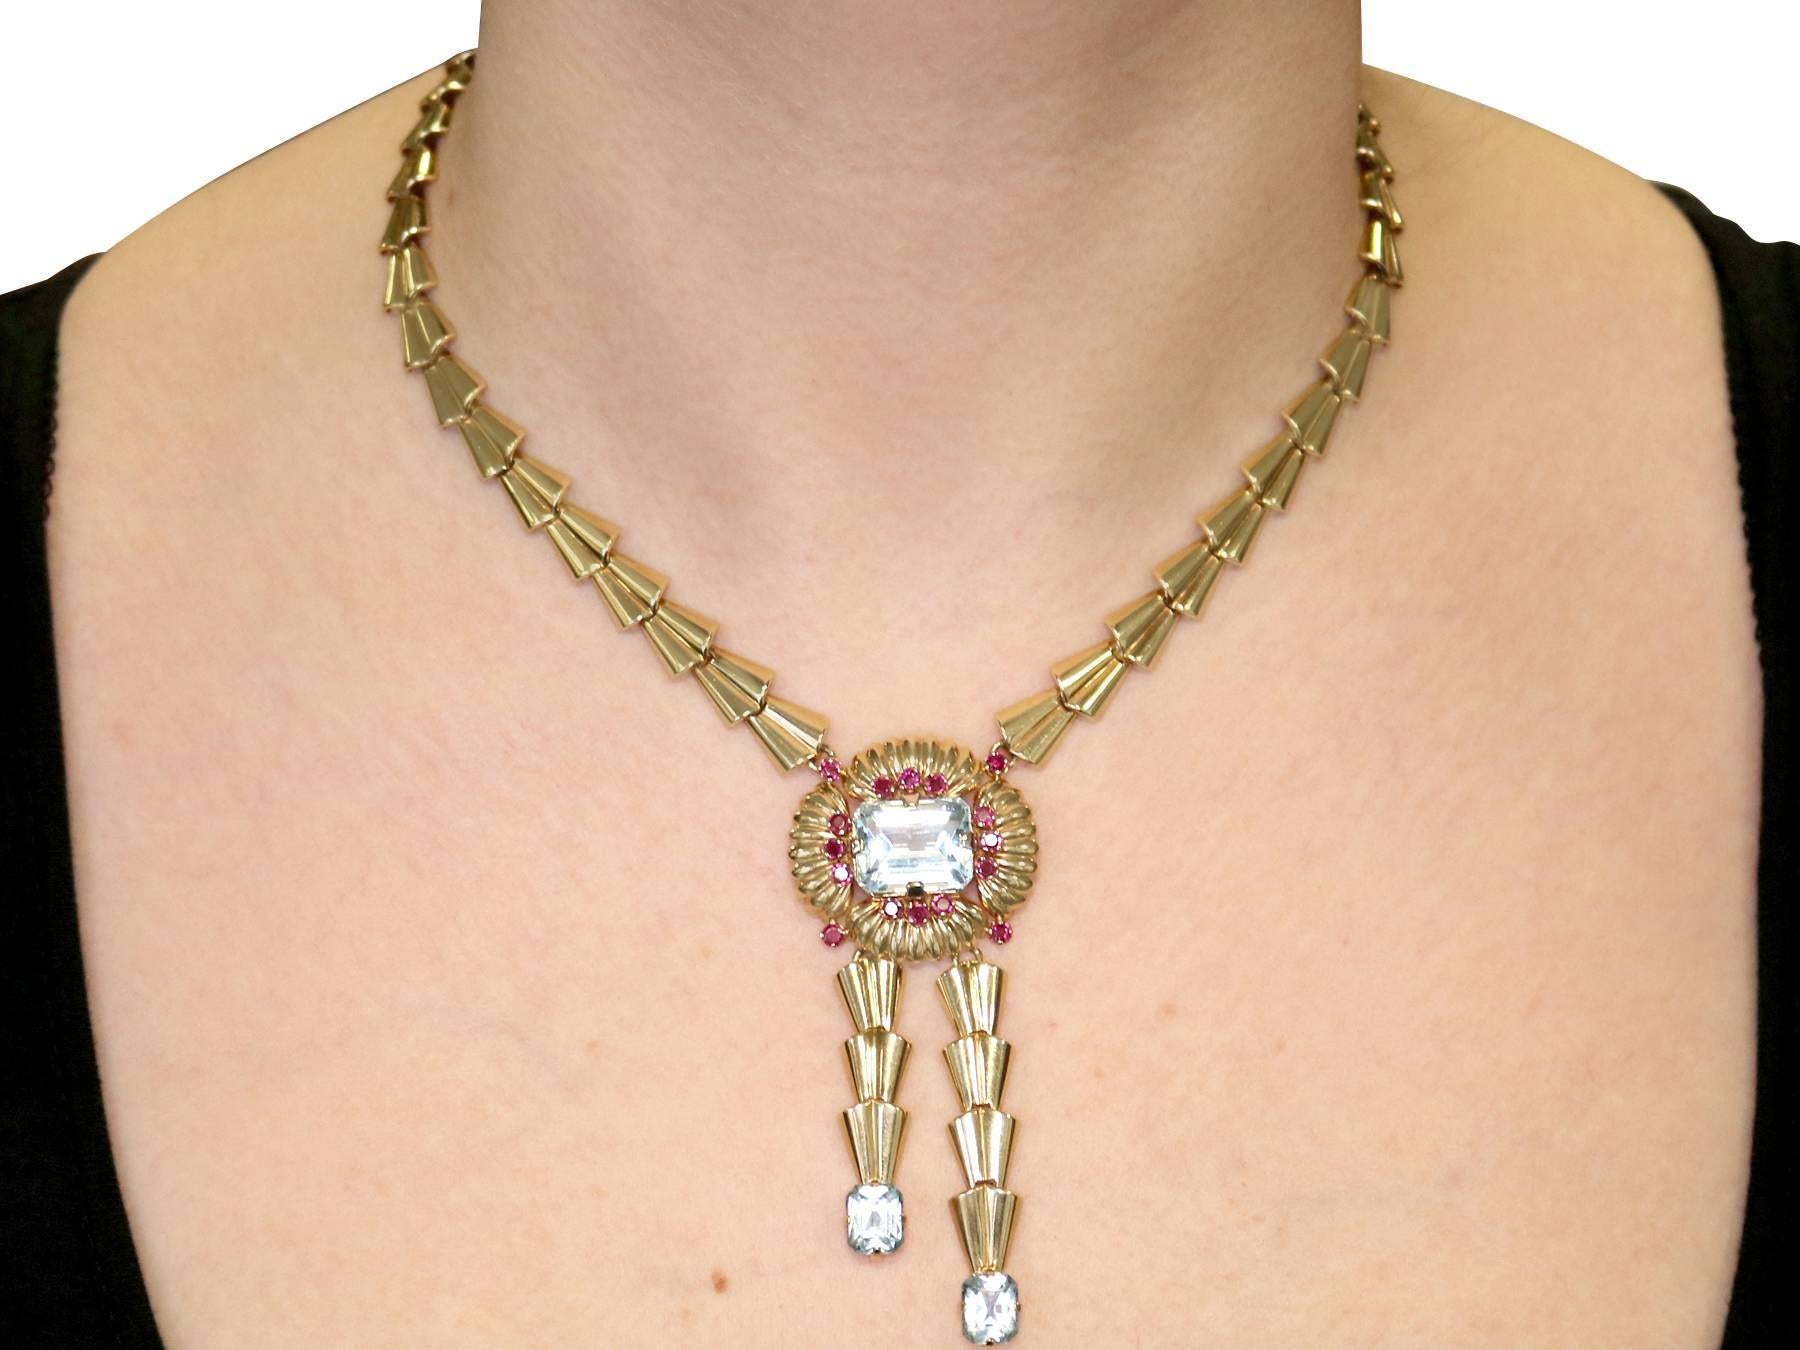 15.84 Carat Aquamarine and 1.28 Carat Ruby, Gold Necklace by Tiffany & Co. 2